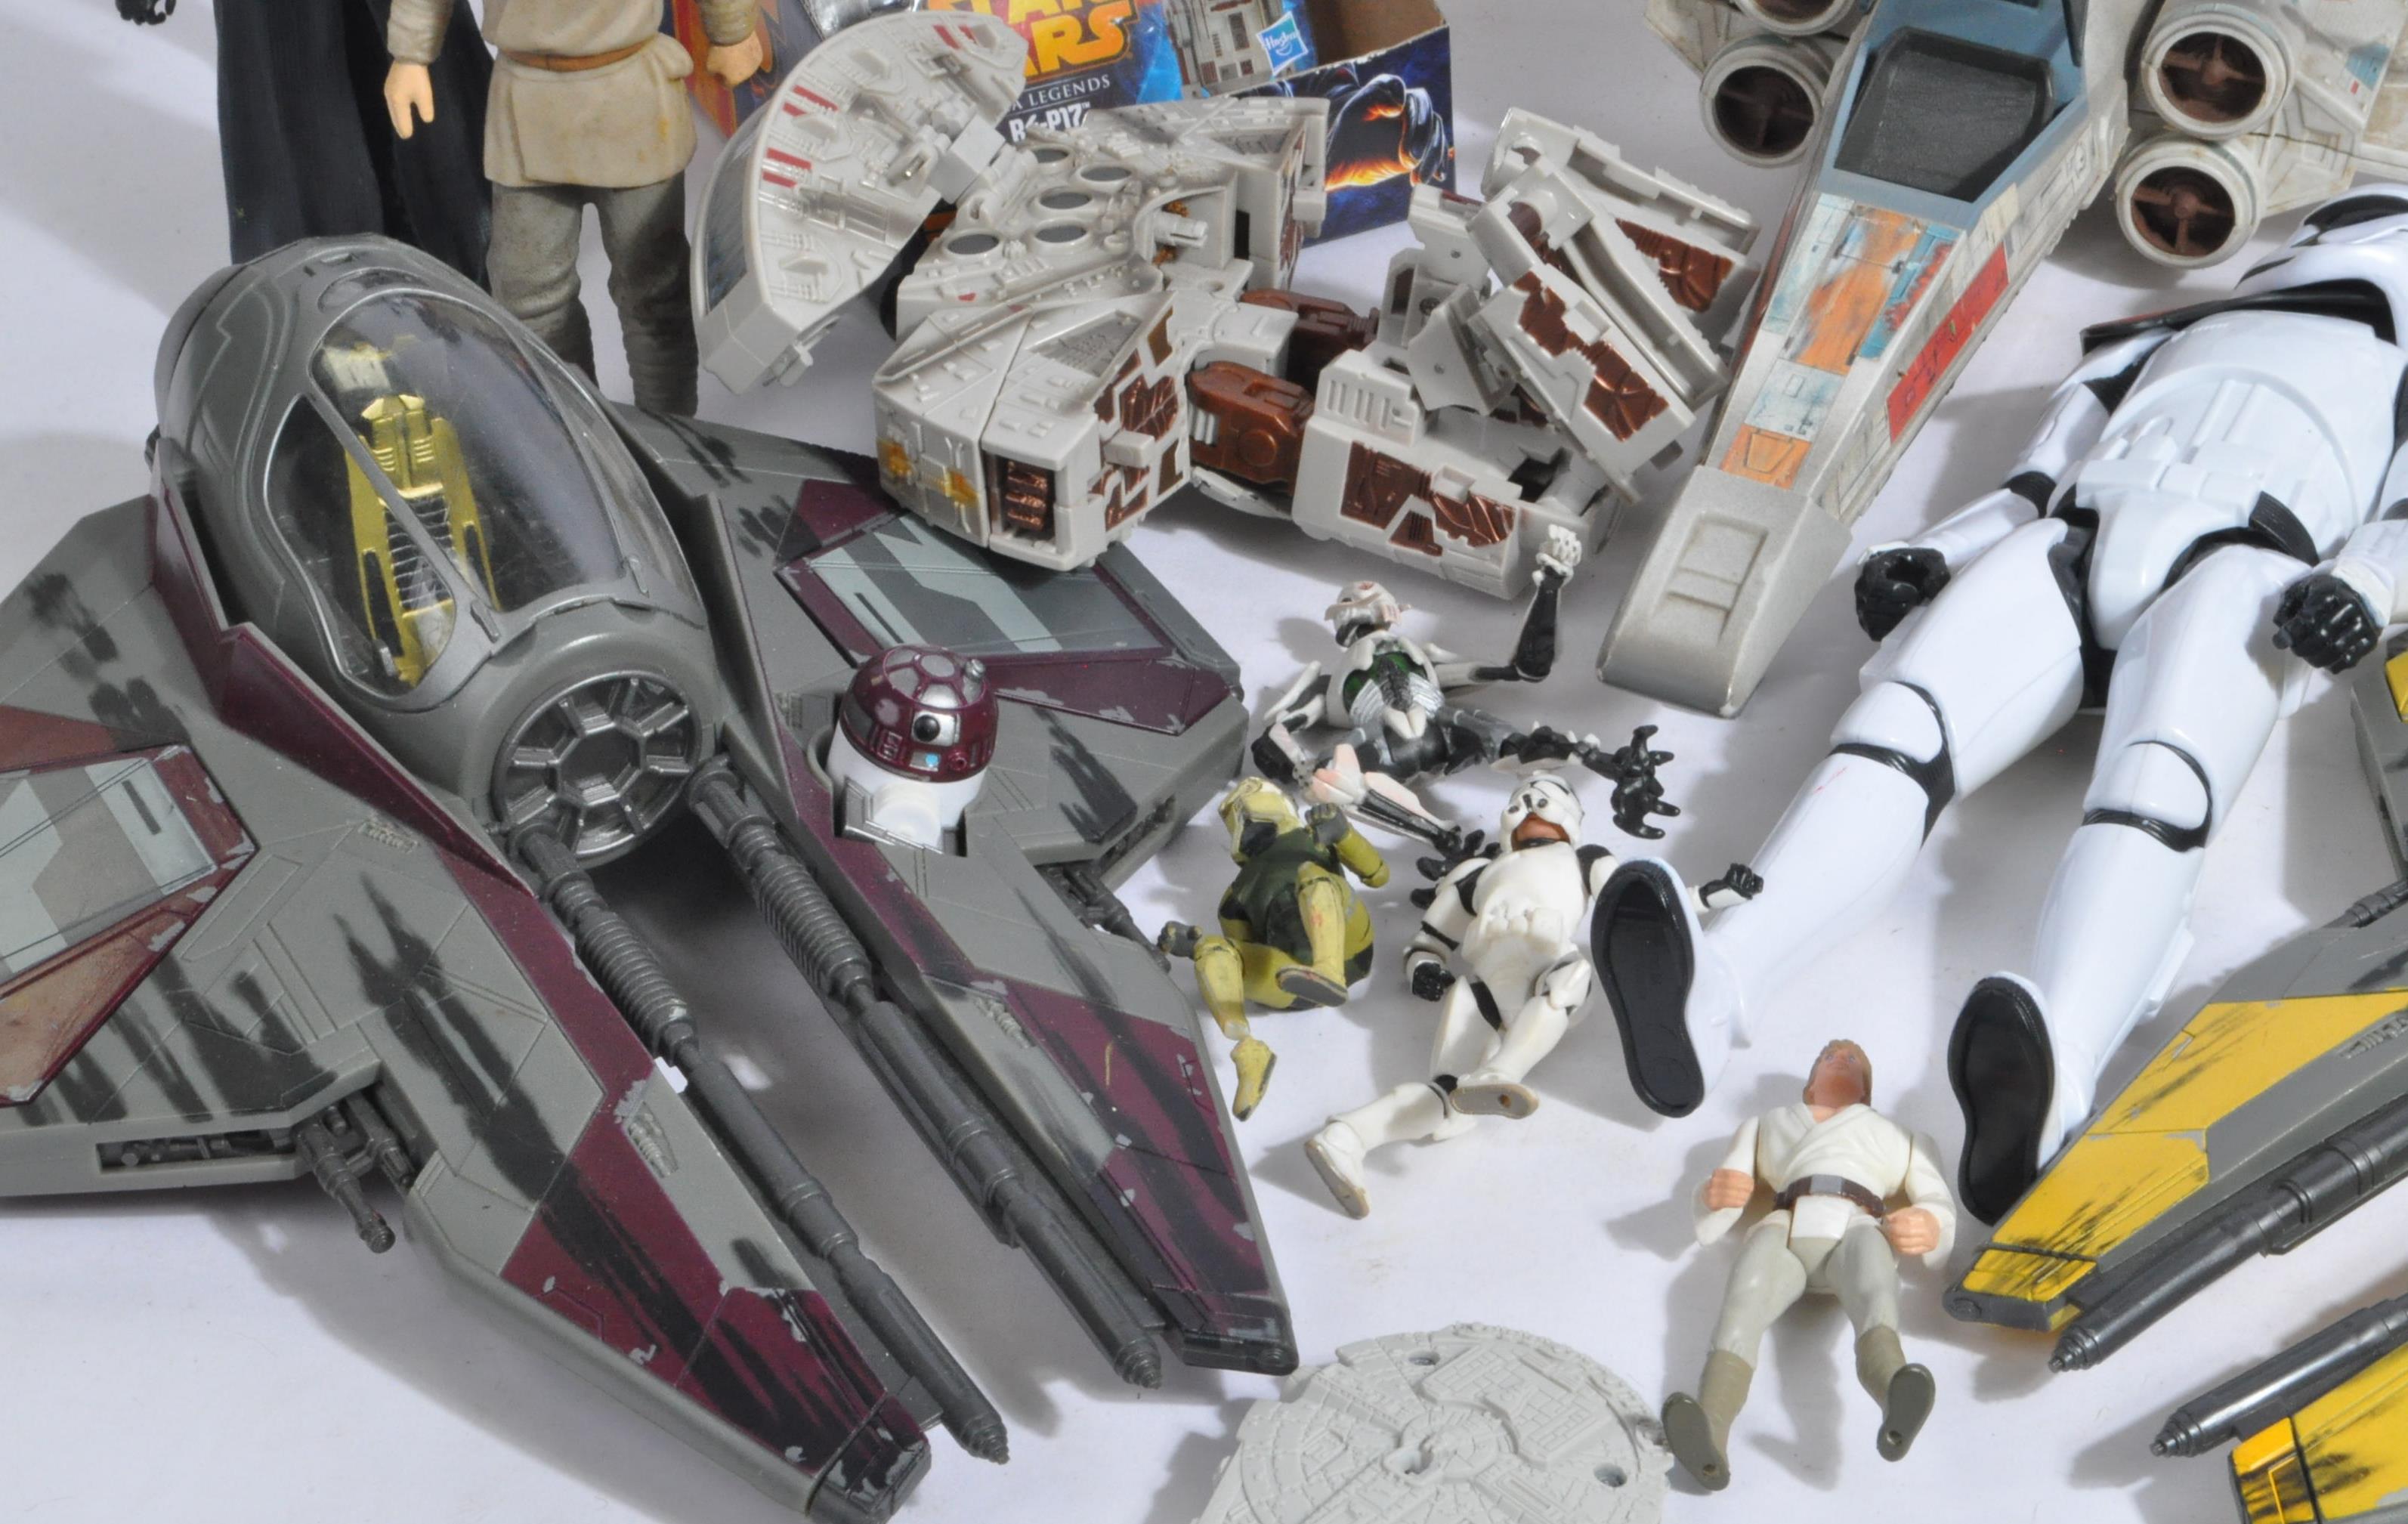 COLLECTION OF ASSORTED STAR WARS ACTION FIGURE PLAY SETS - Image 5 of 7